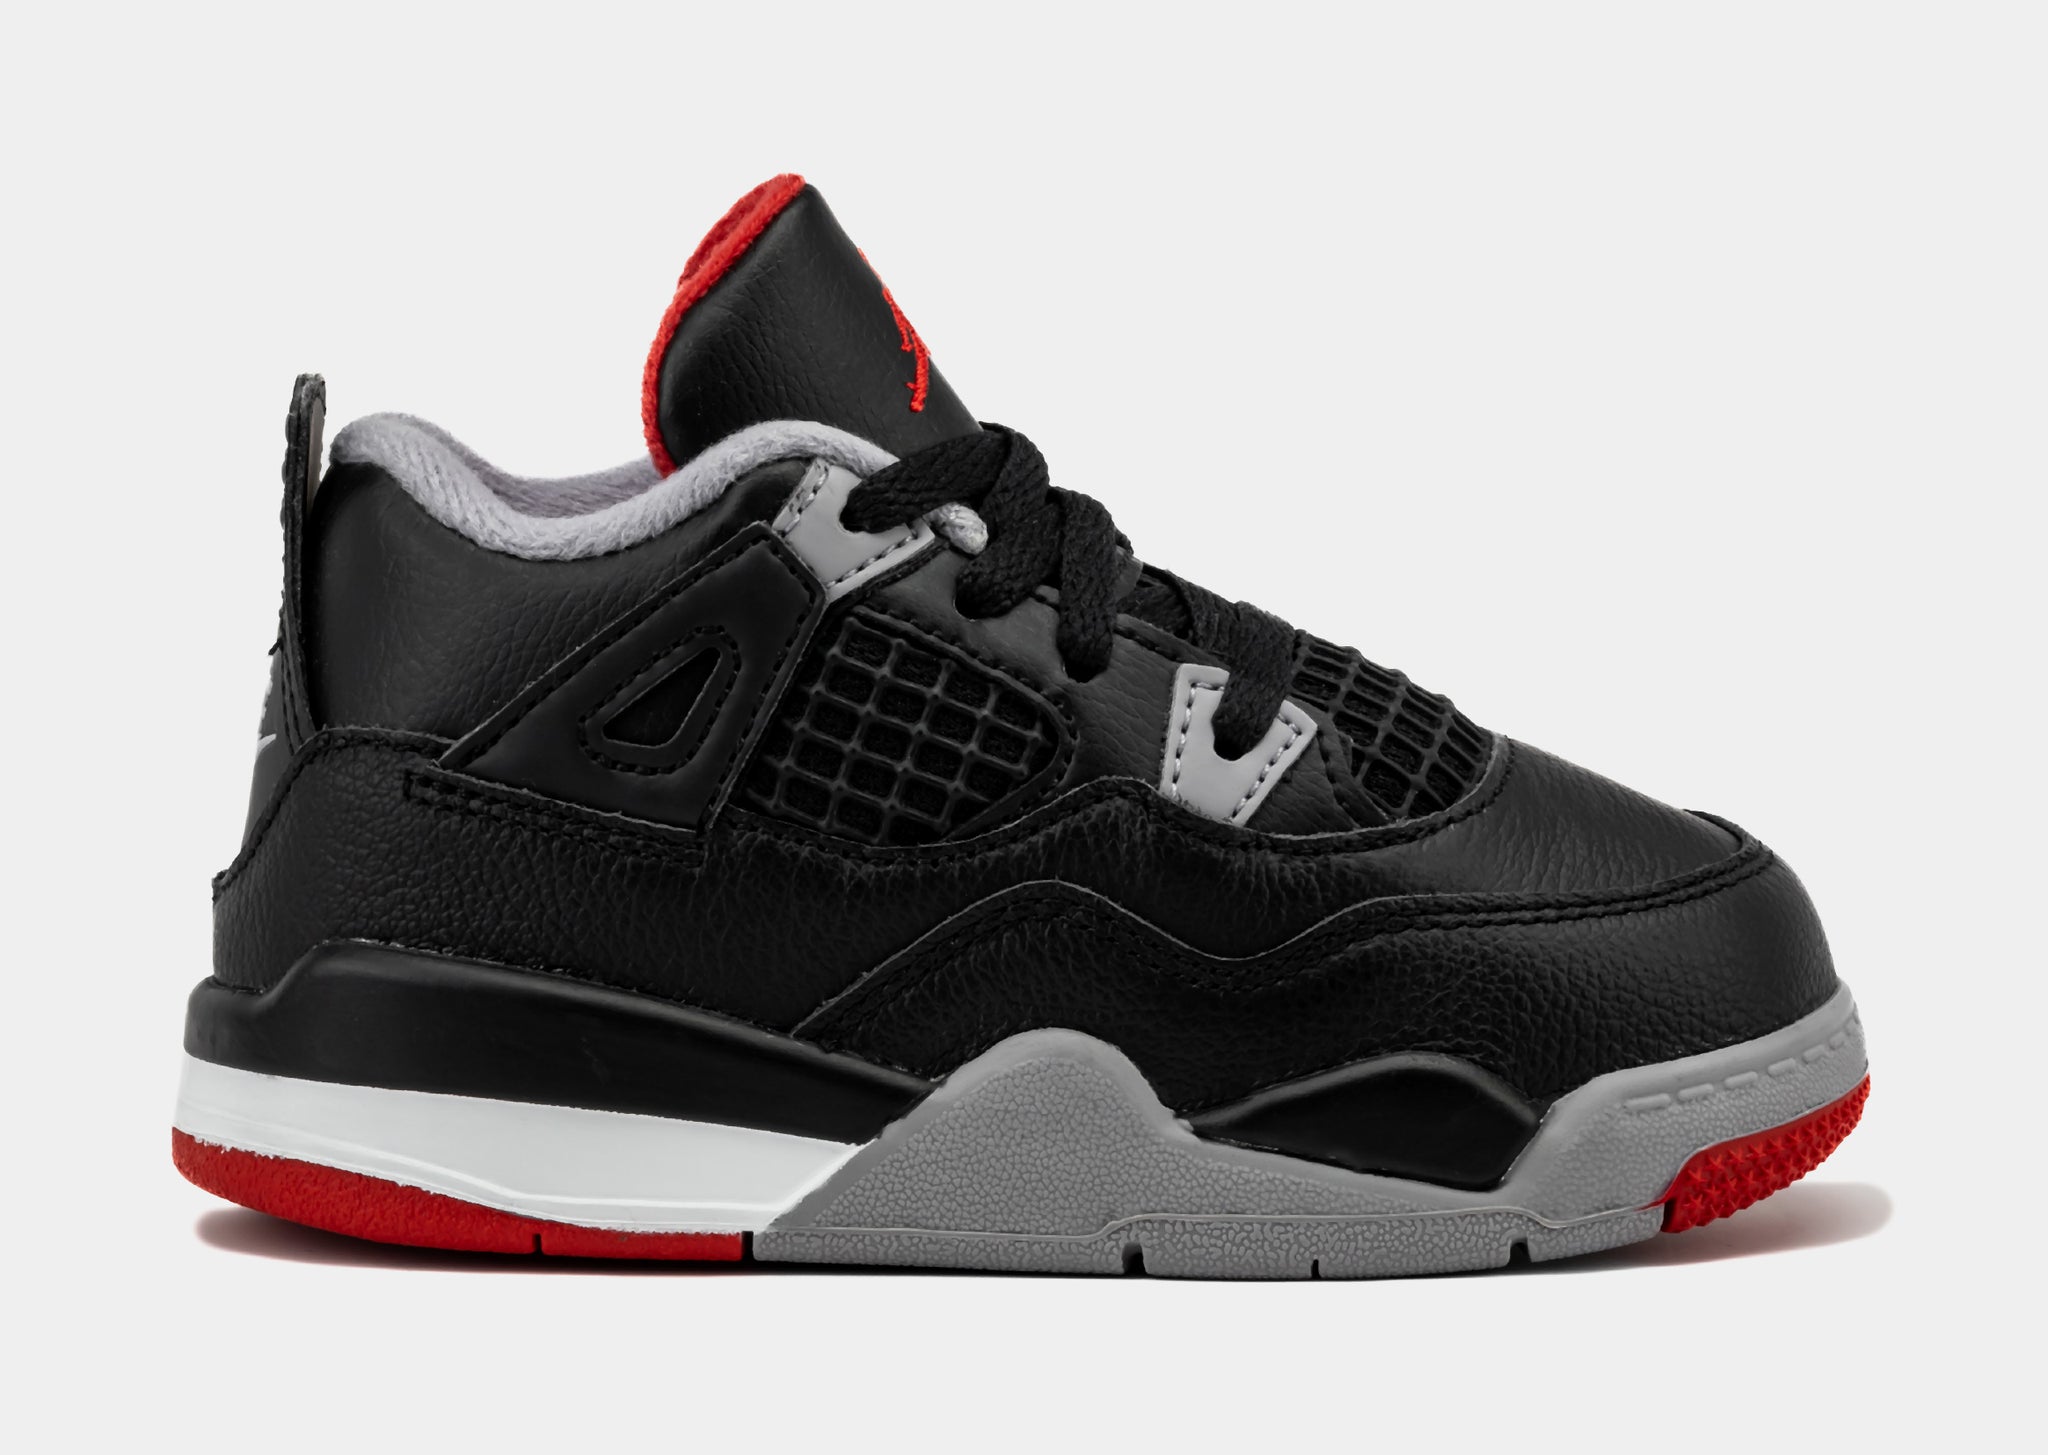 Air Jordan 4 Retro Bred Reimagined Infant Toddler Lifestyle Shoes  (Black/Fire Red/Cement Grey)